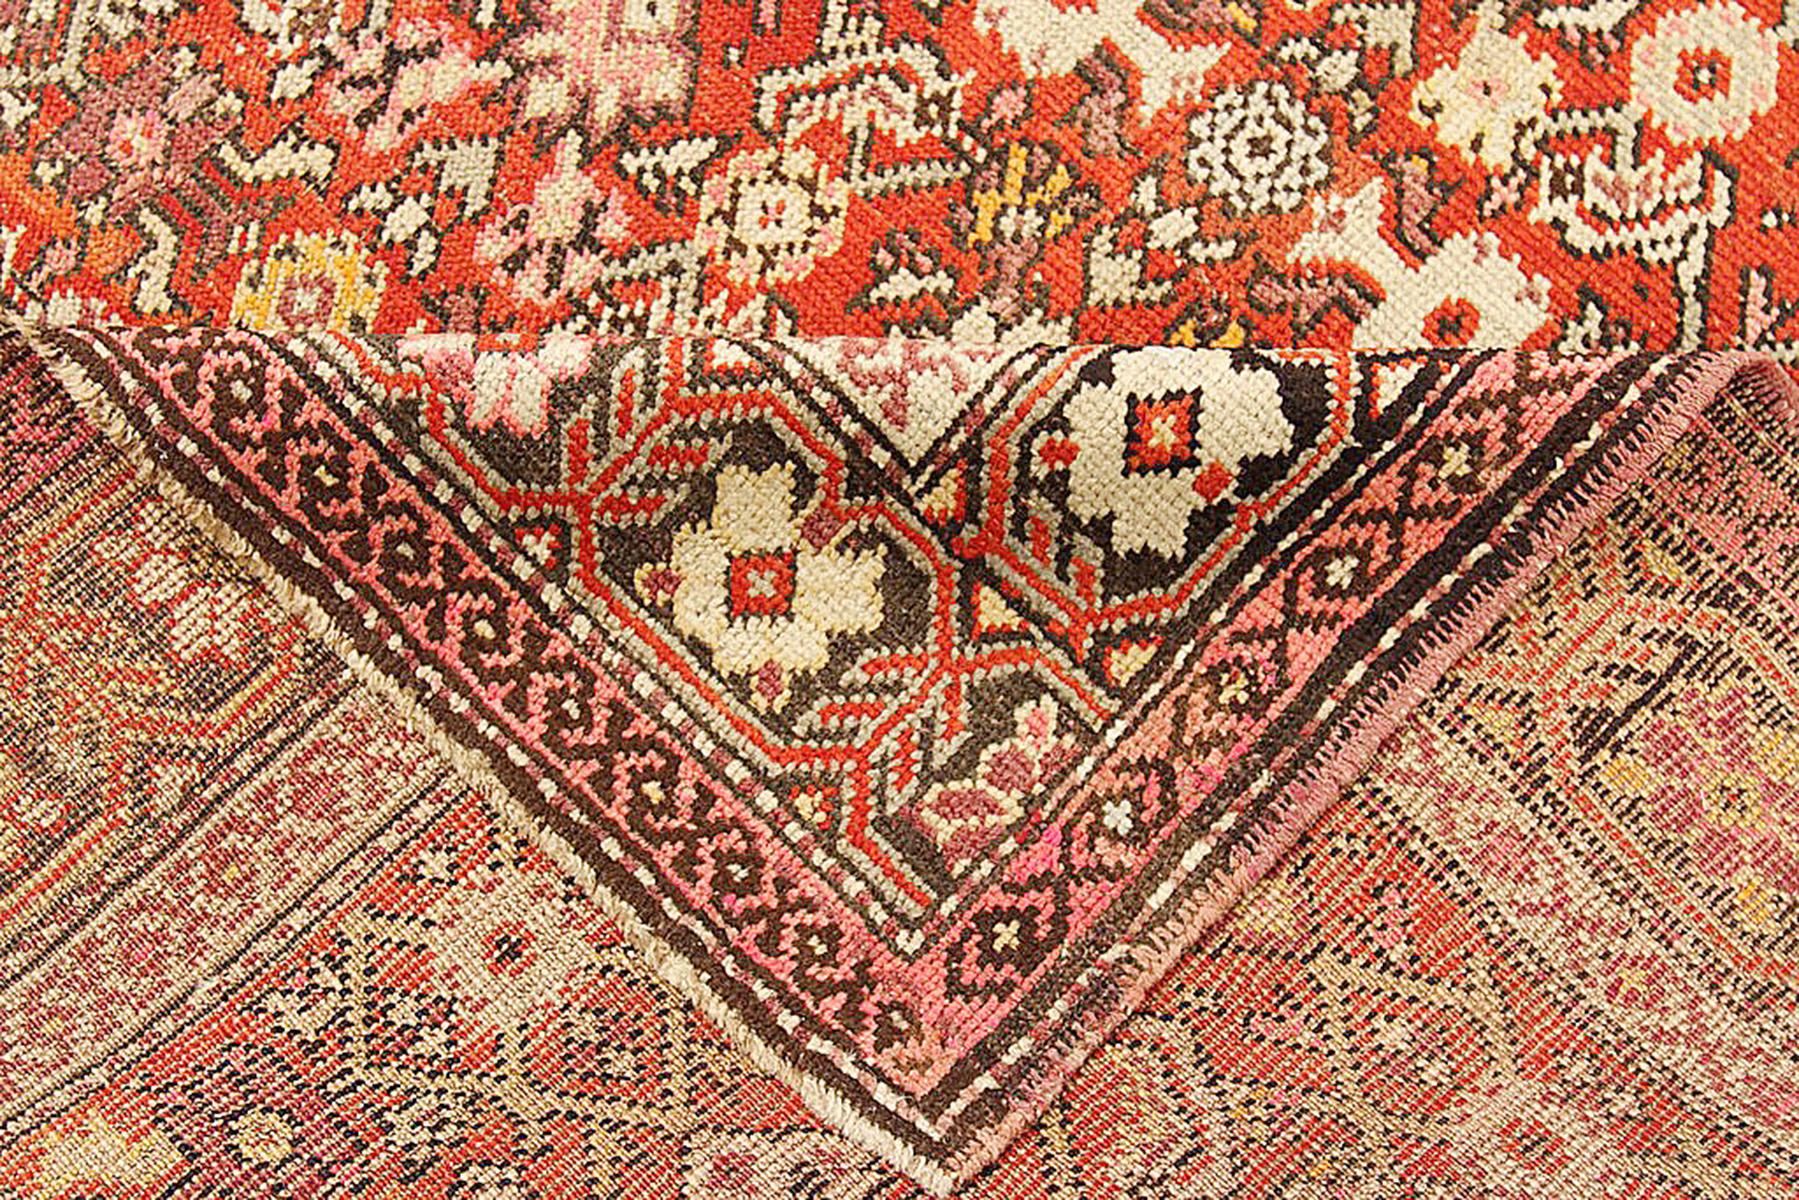 Hand-Woven Antique Persian Karajeh Rug with Ivory and Black Floral Medallions on Red Field For Sale